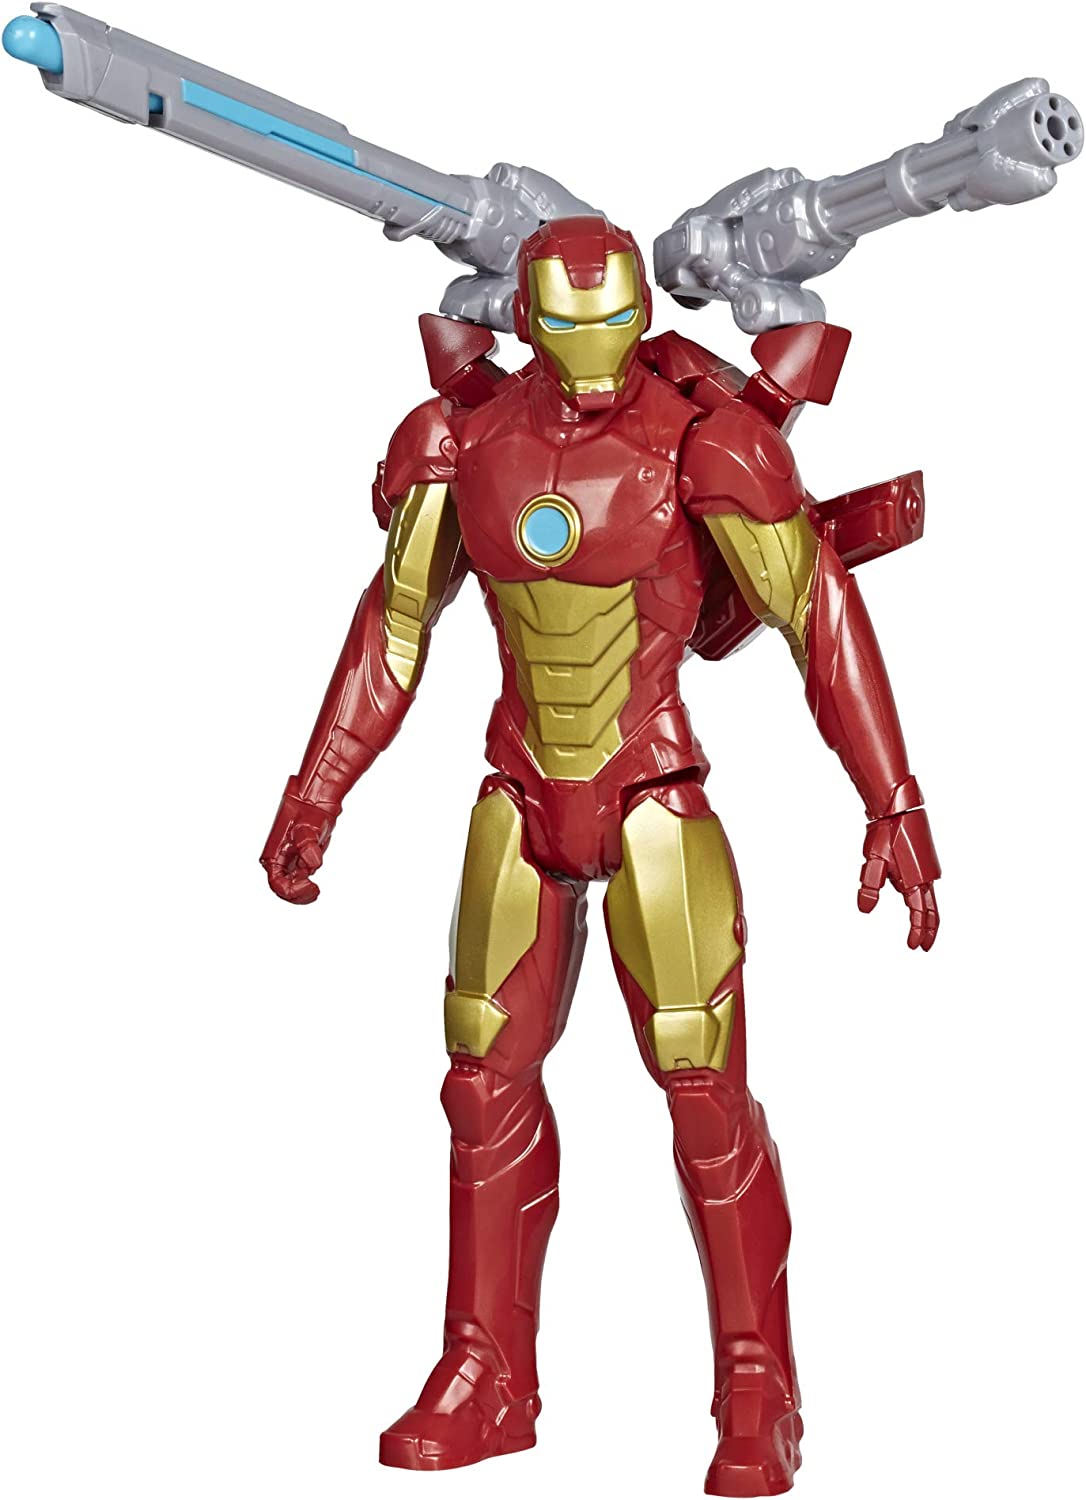 Avengers Marvel Titan Hero Series Blast Gear Iron Man Action Figure, 12-Inch Toy, with Launcher, 2 Accessories and Projectile